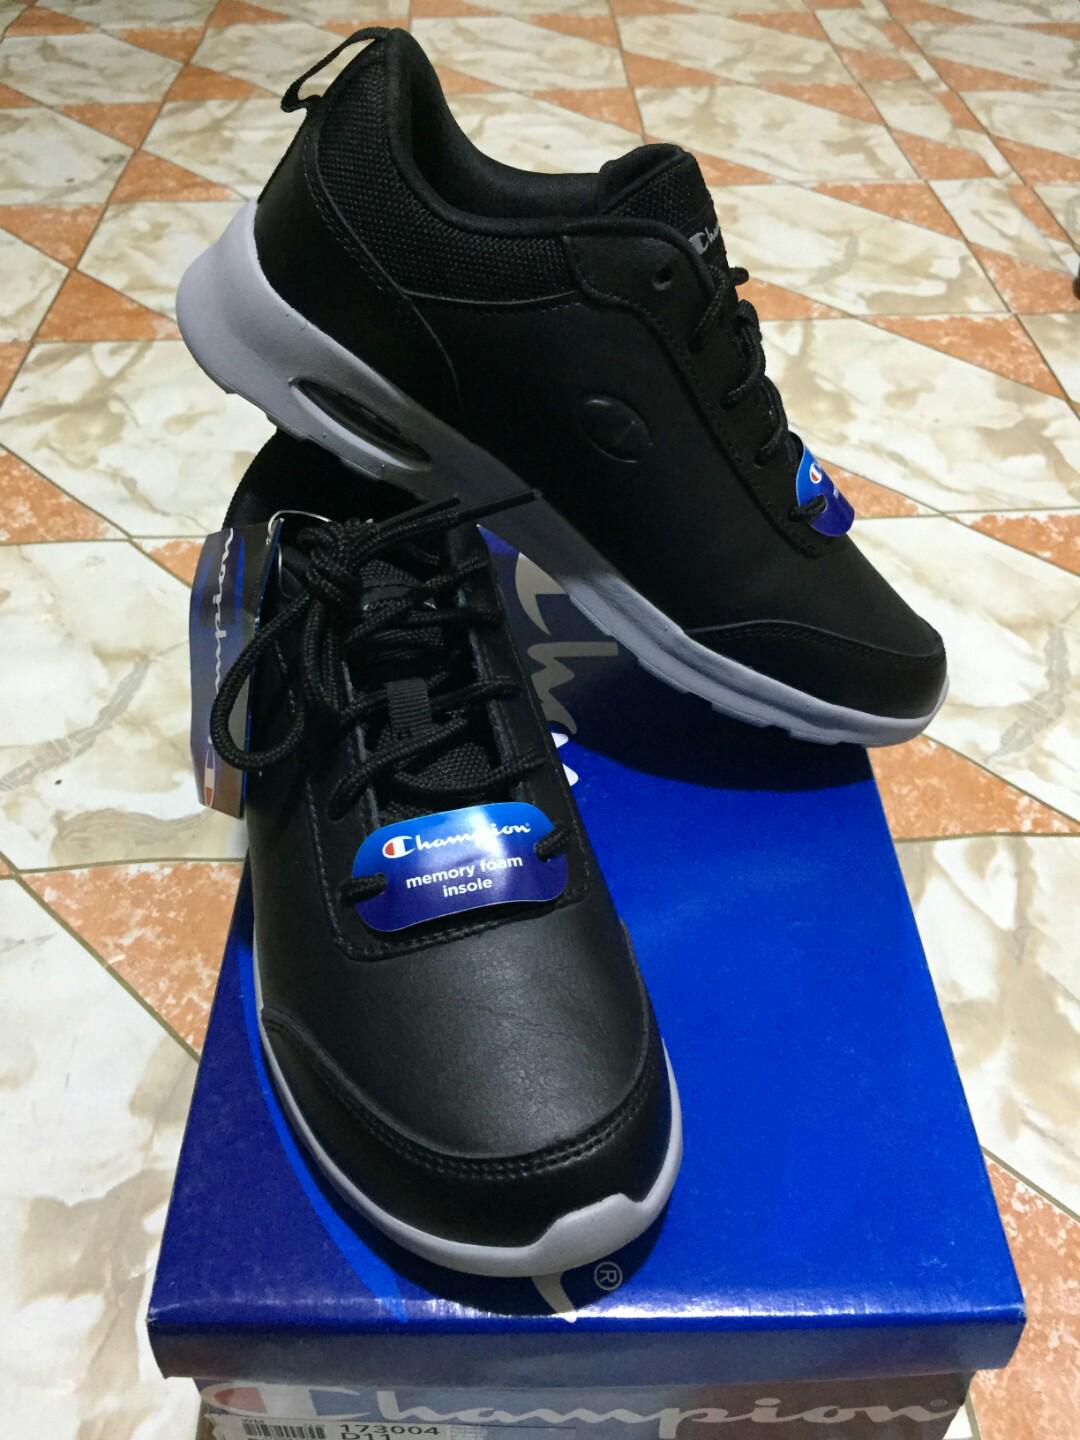 champion sneakers at payless